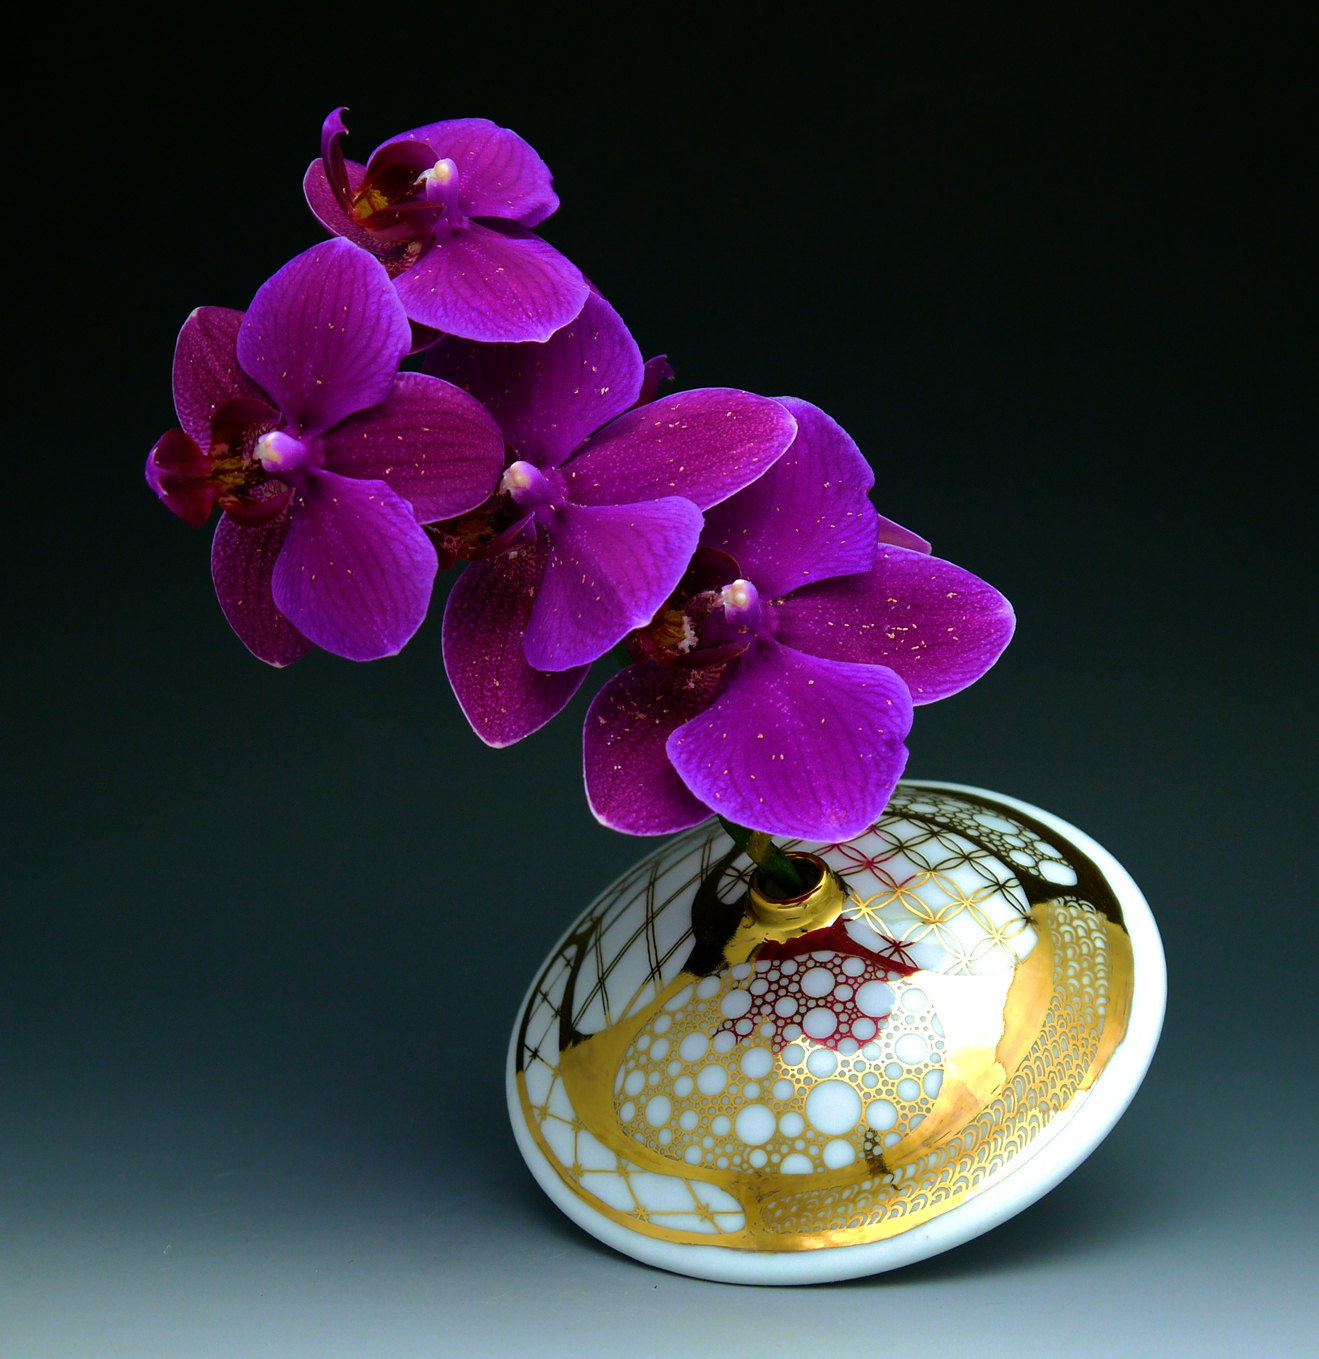 Small Bud Vase, handpainted porcelain, traditional pattern, gold luster | $95.00